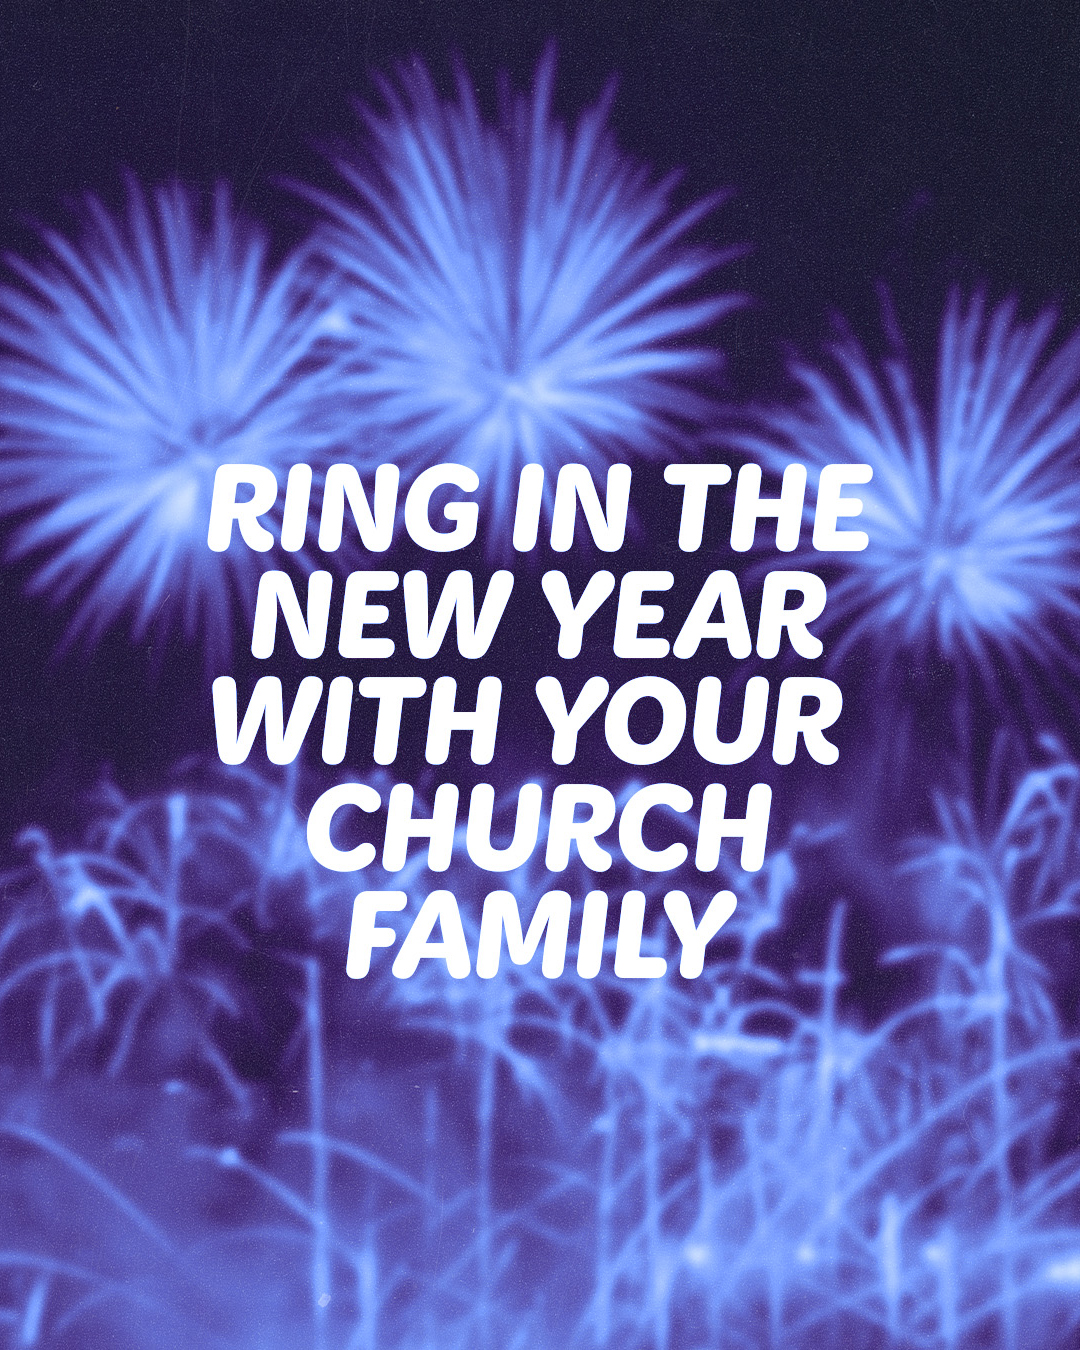 Ring in the new year